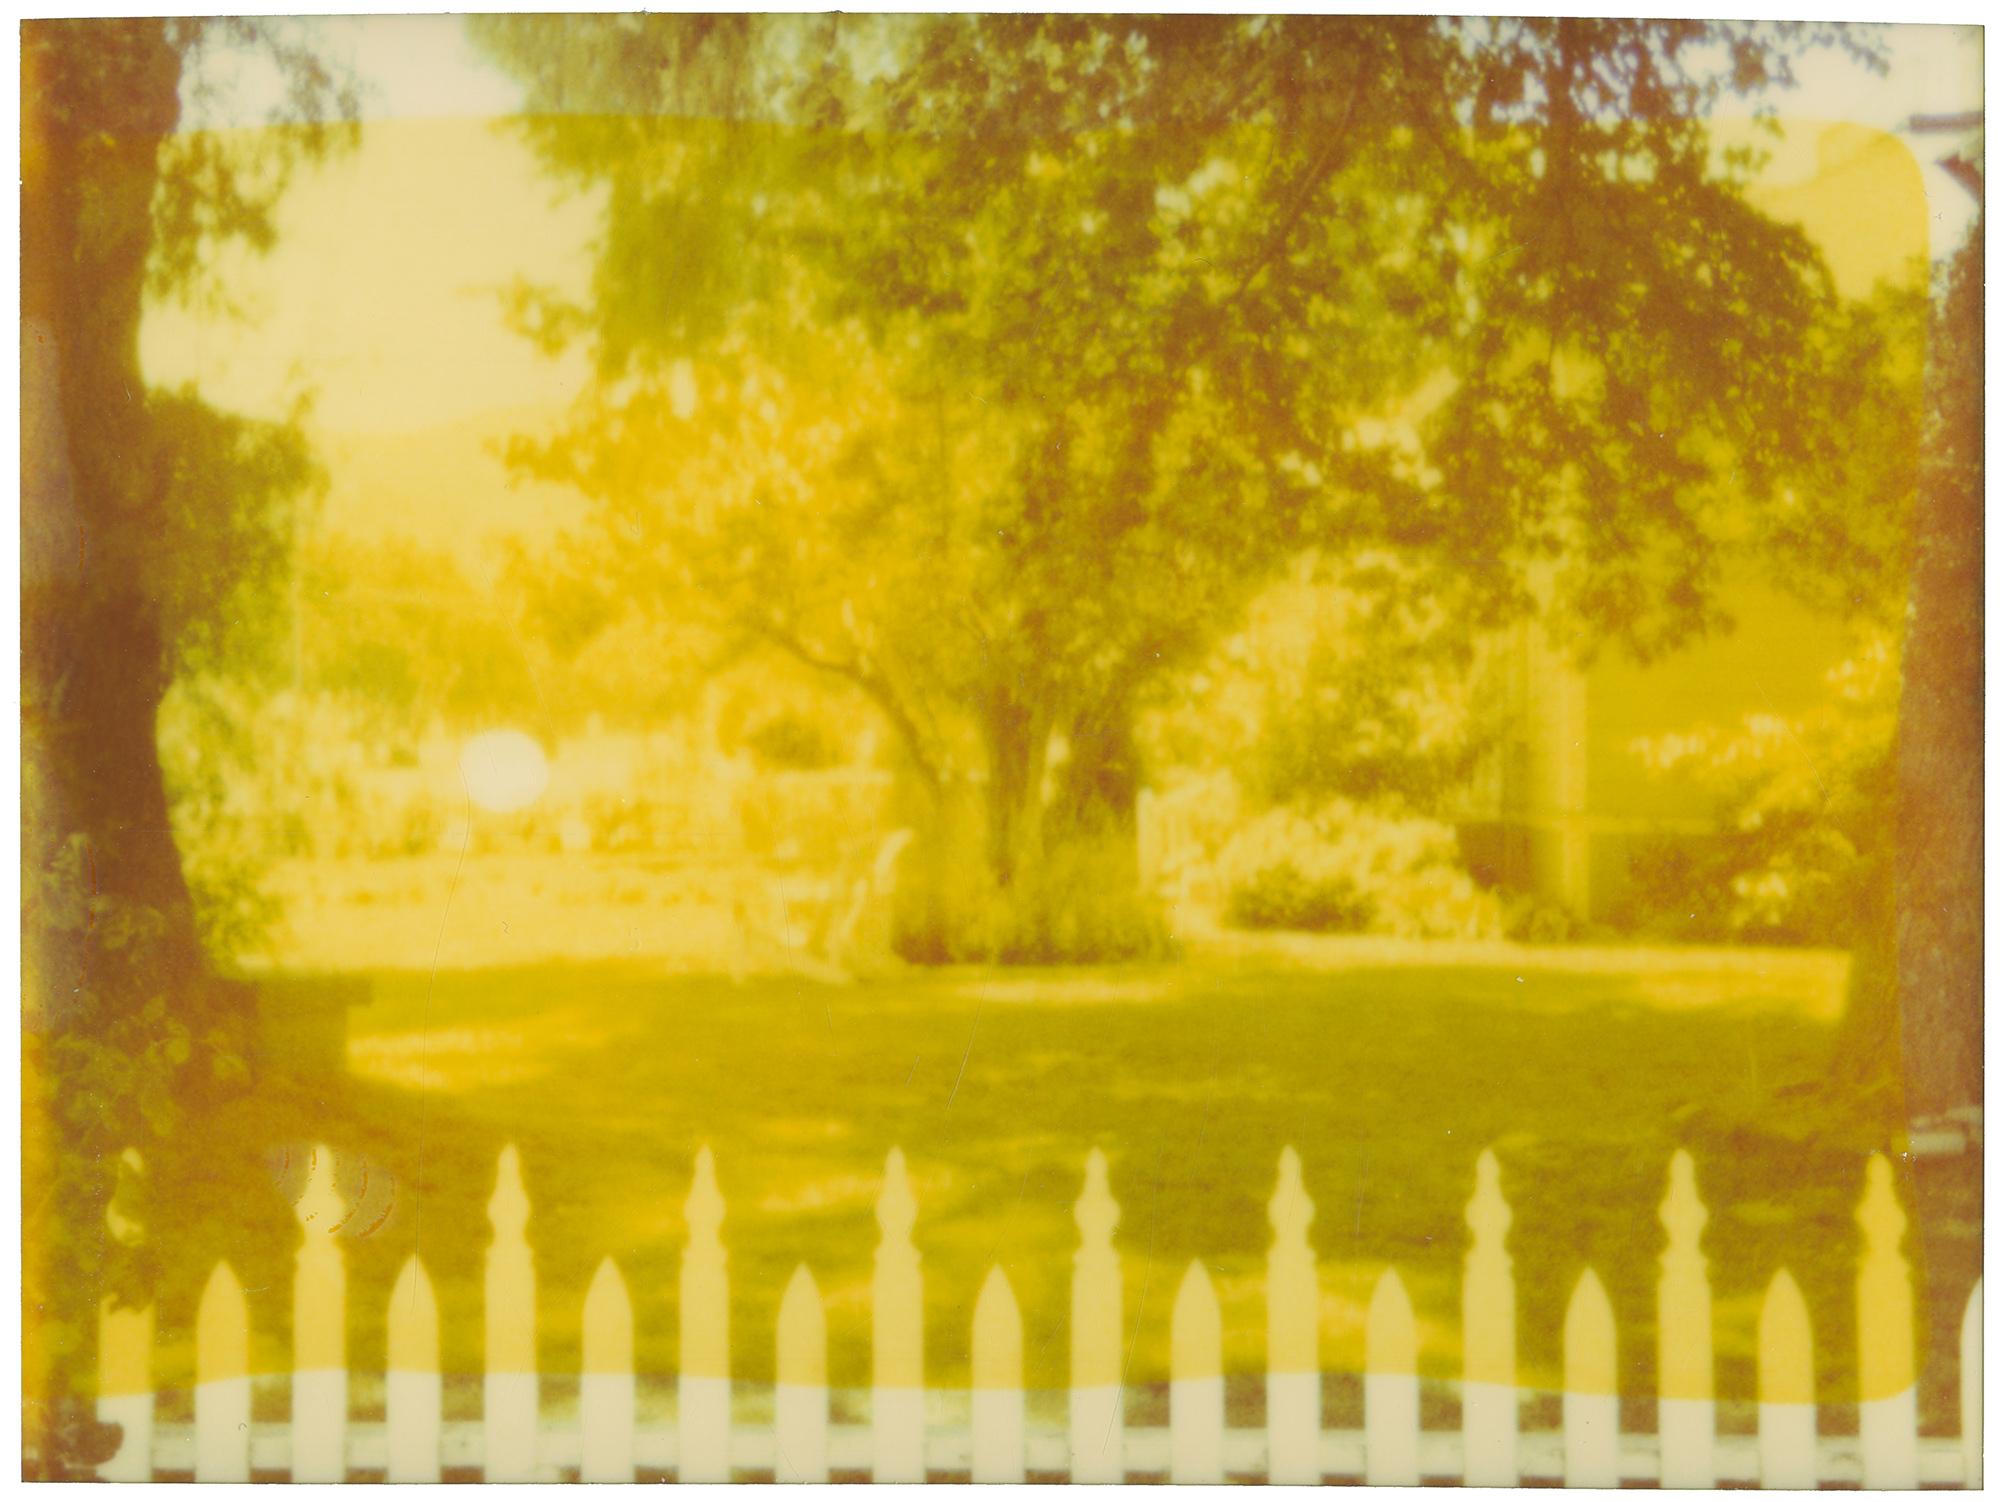 White Picket Fence (Suburbia), diptych, analog, mounted, Polaroid, Photograph - Brown Color Photograph by Stefanie Schneider